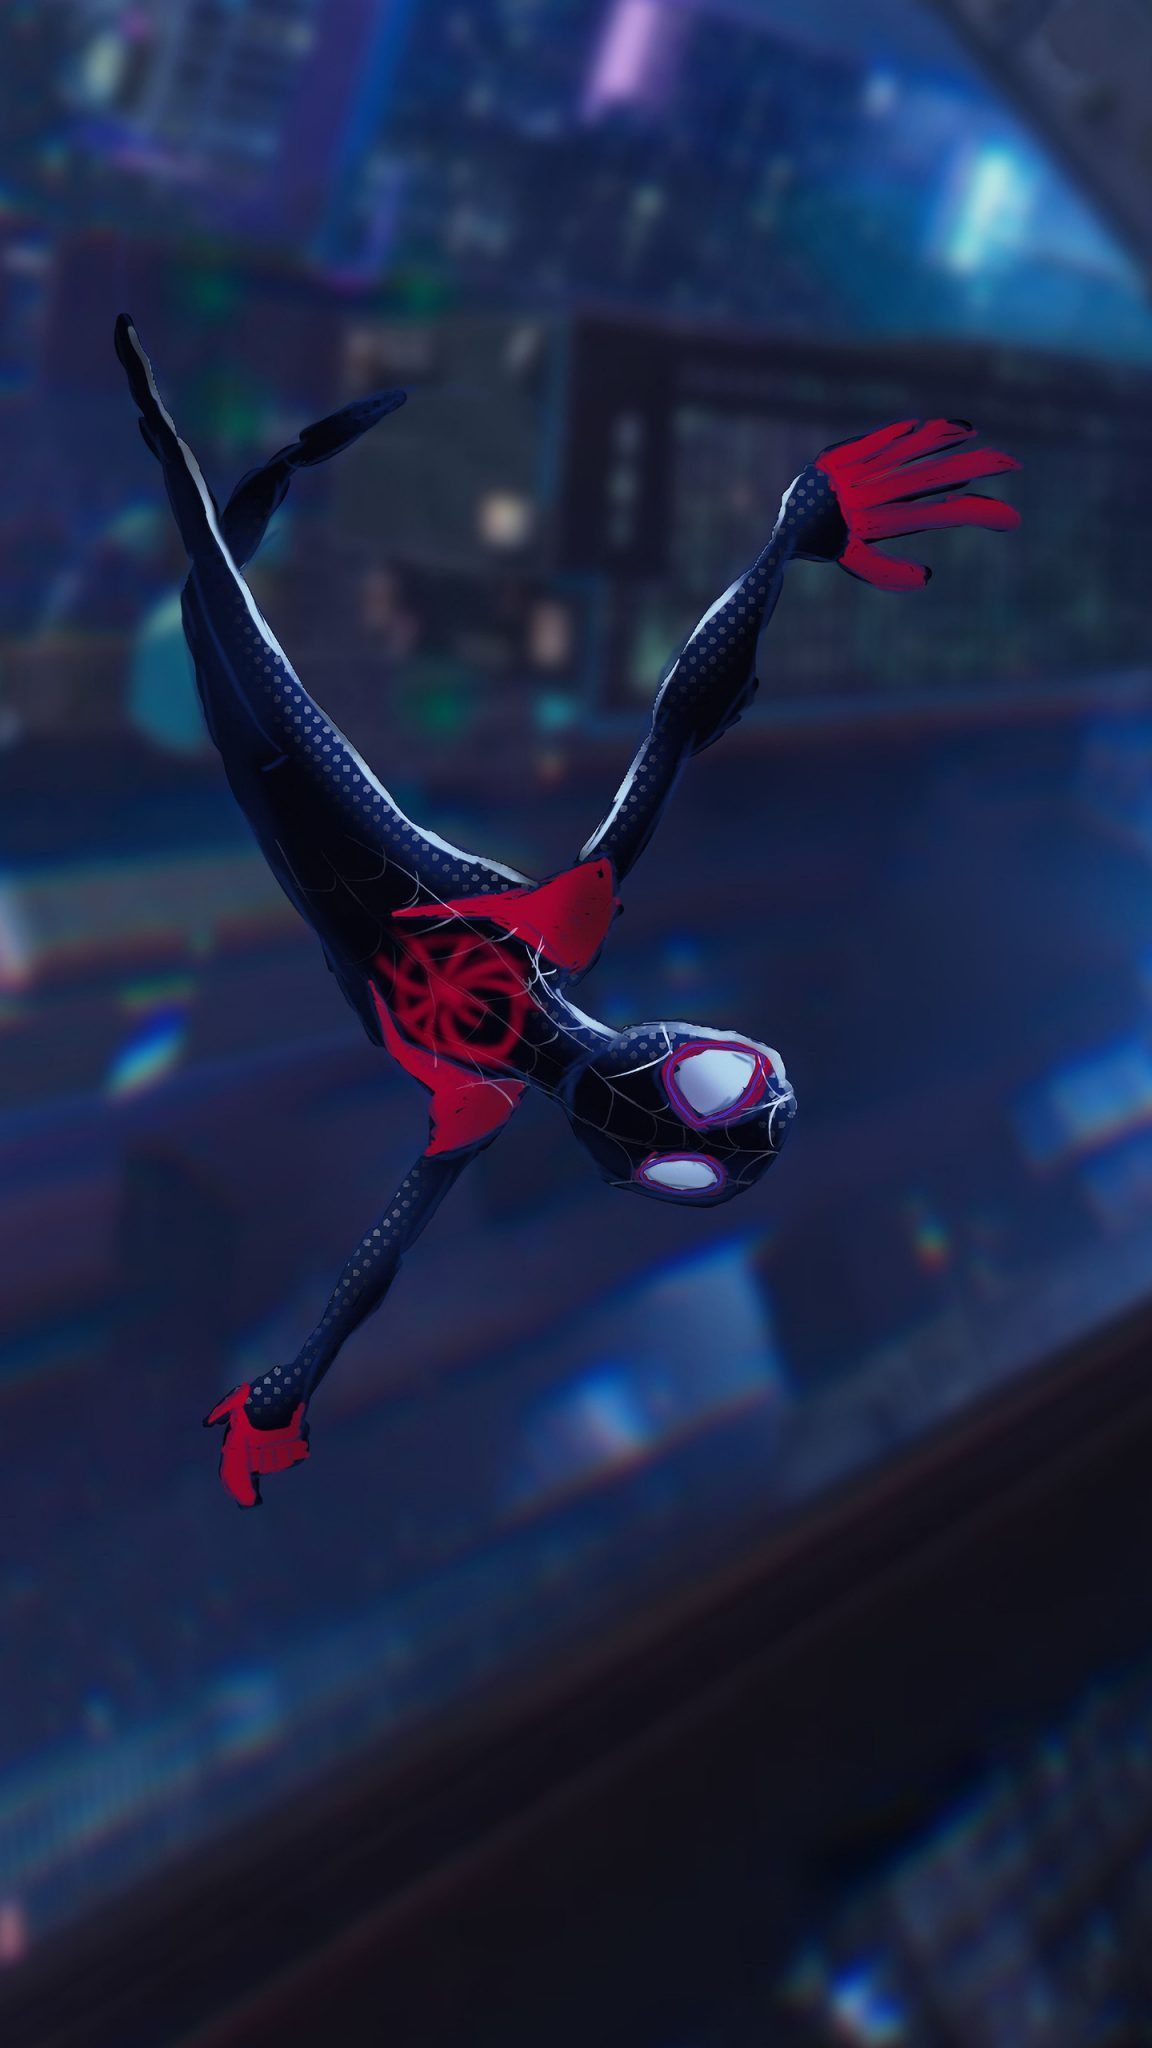 Free download Top Spiderman Wallpaper PS4 Homecoming Into